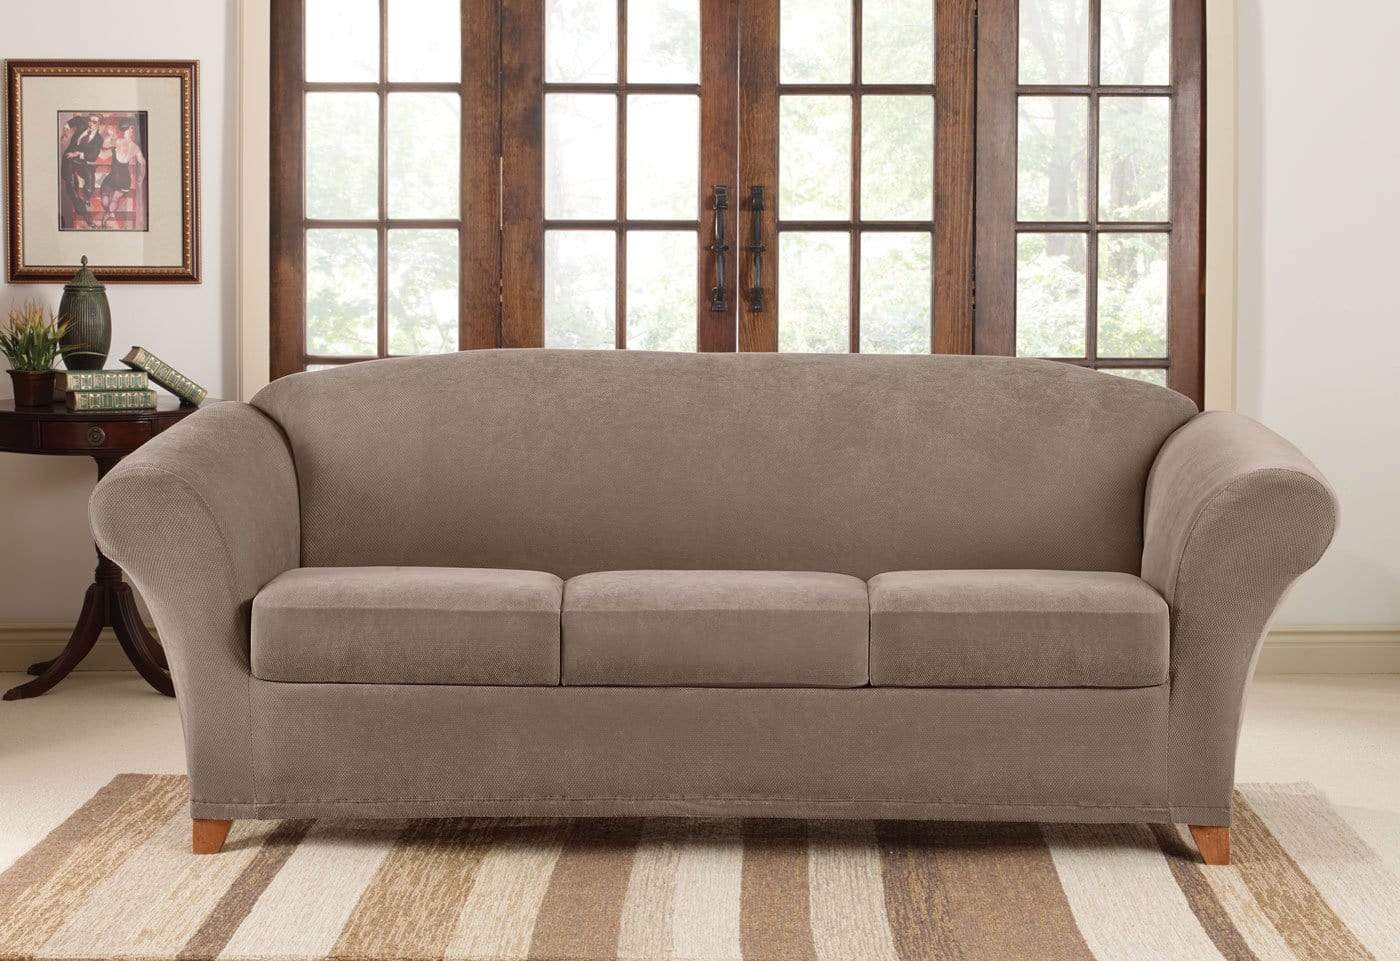 SureFit Stretch Piqué Four Piece Sofa Slipcover   Form Fit   Individual Cushion Covers   Machine Washable in Taupe